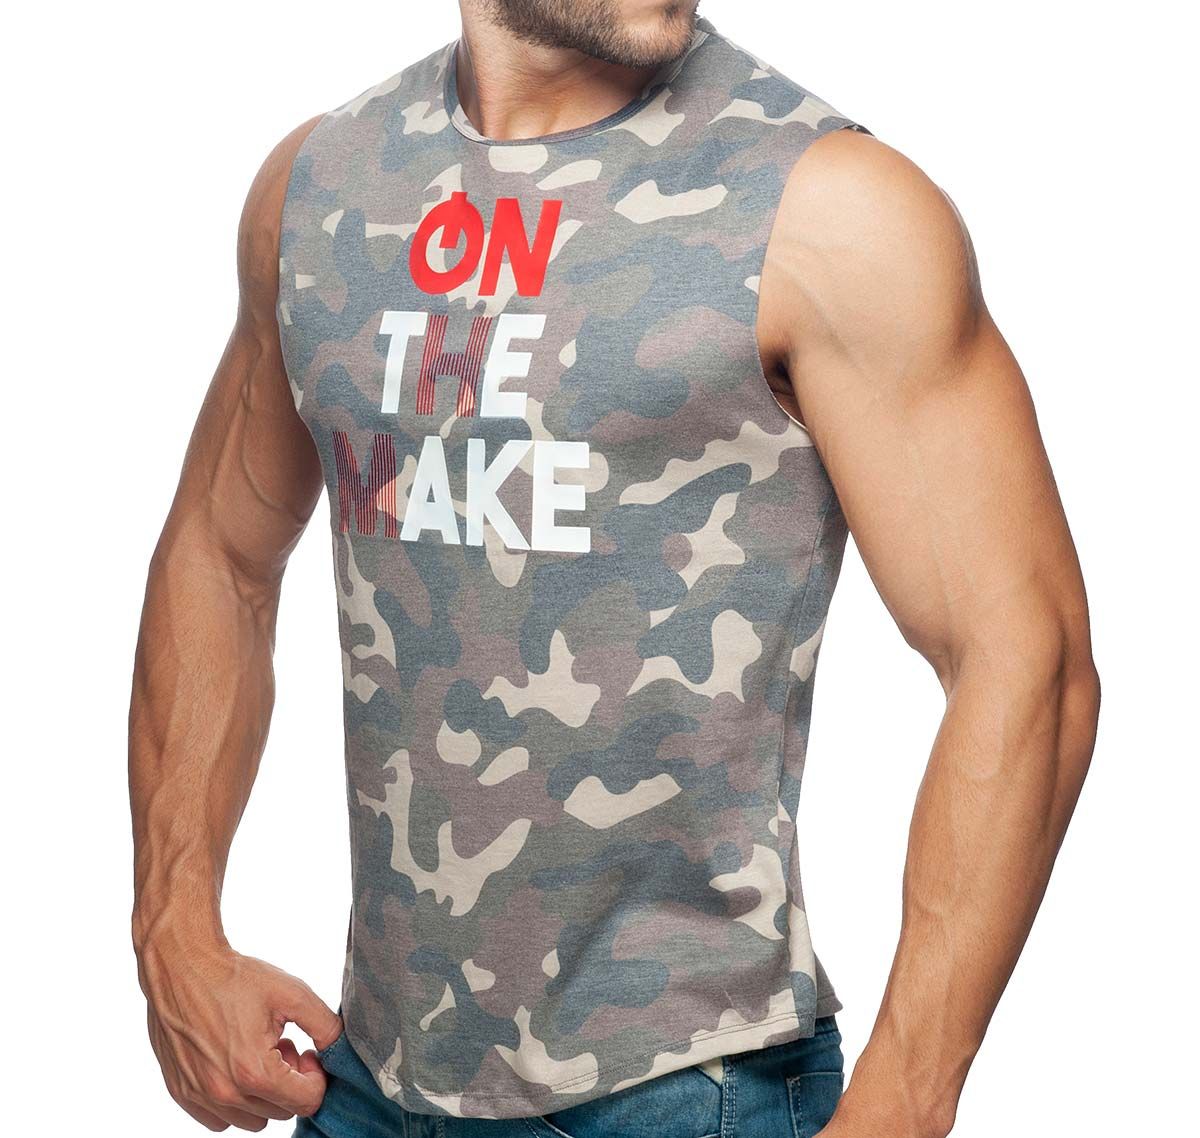 Addicted Tank Top ON THE MAKE SHOULDER TANKTOP AD915, army